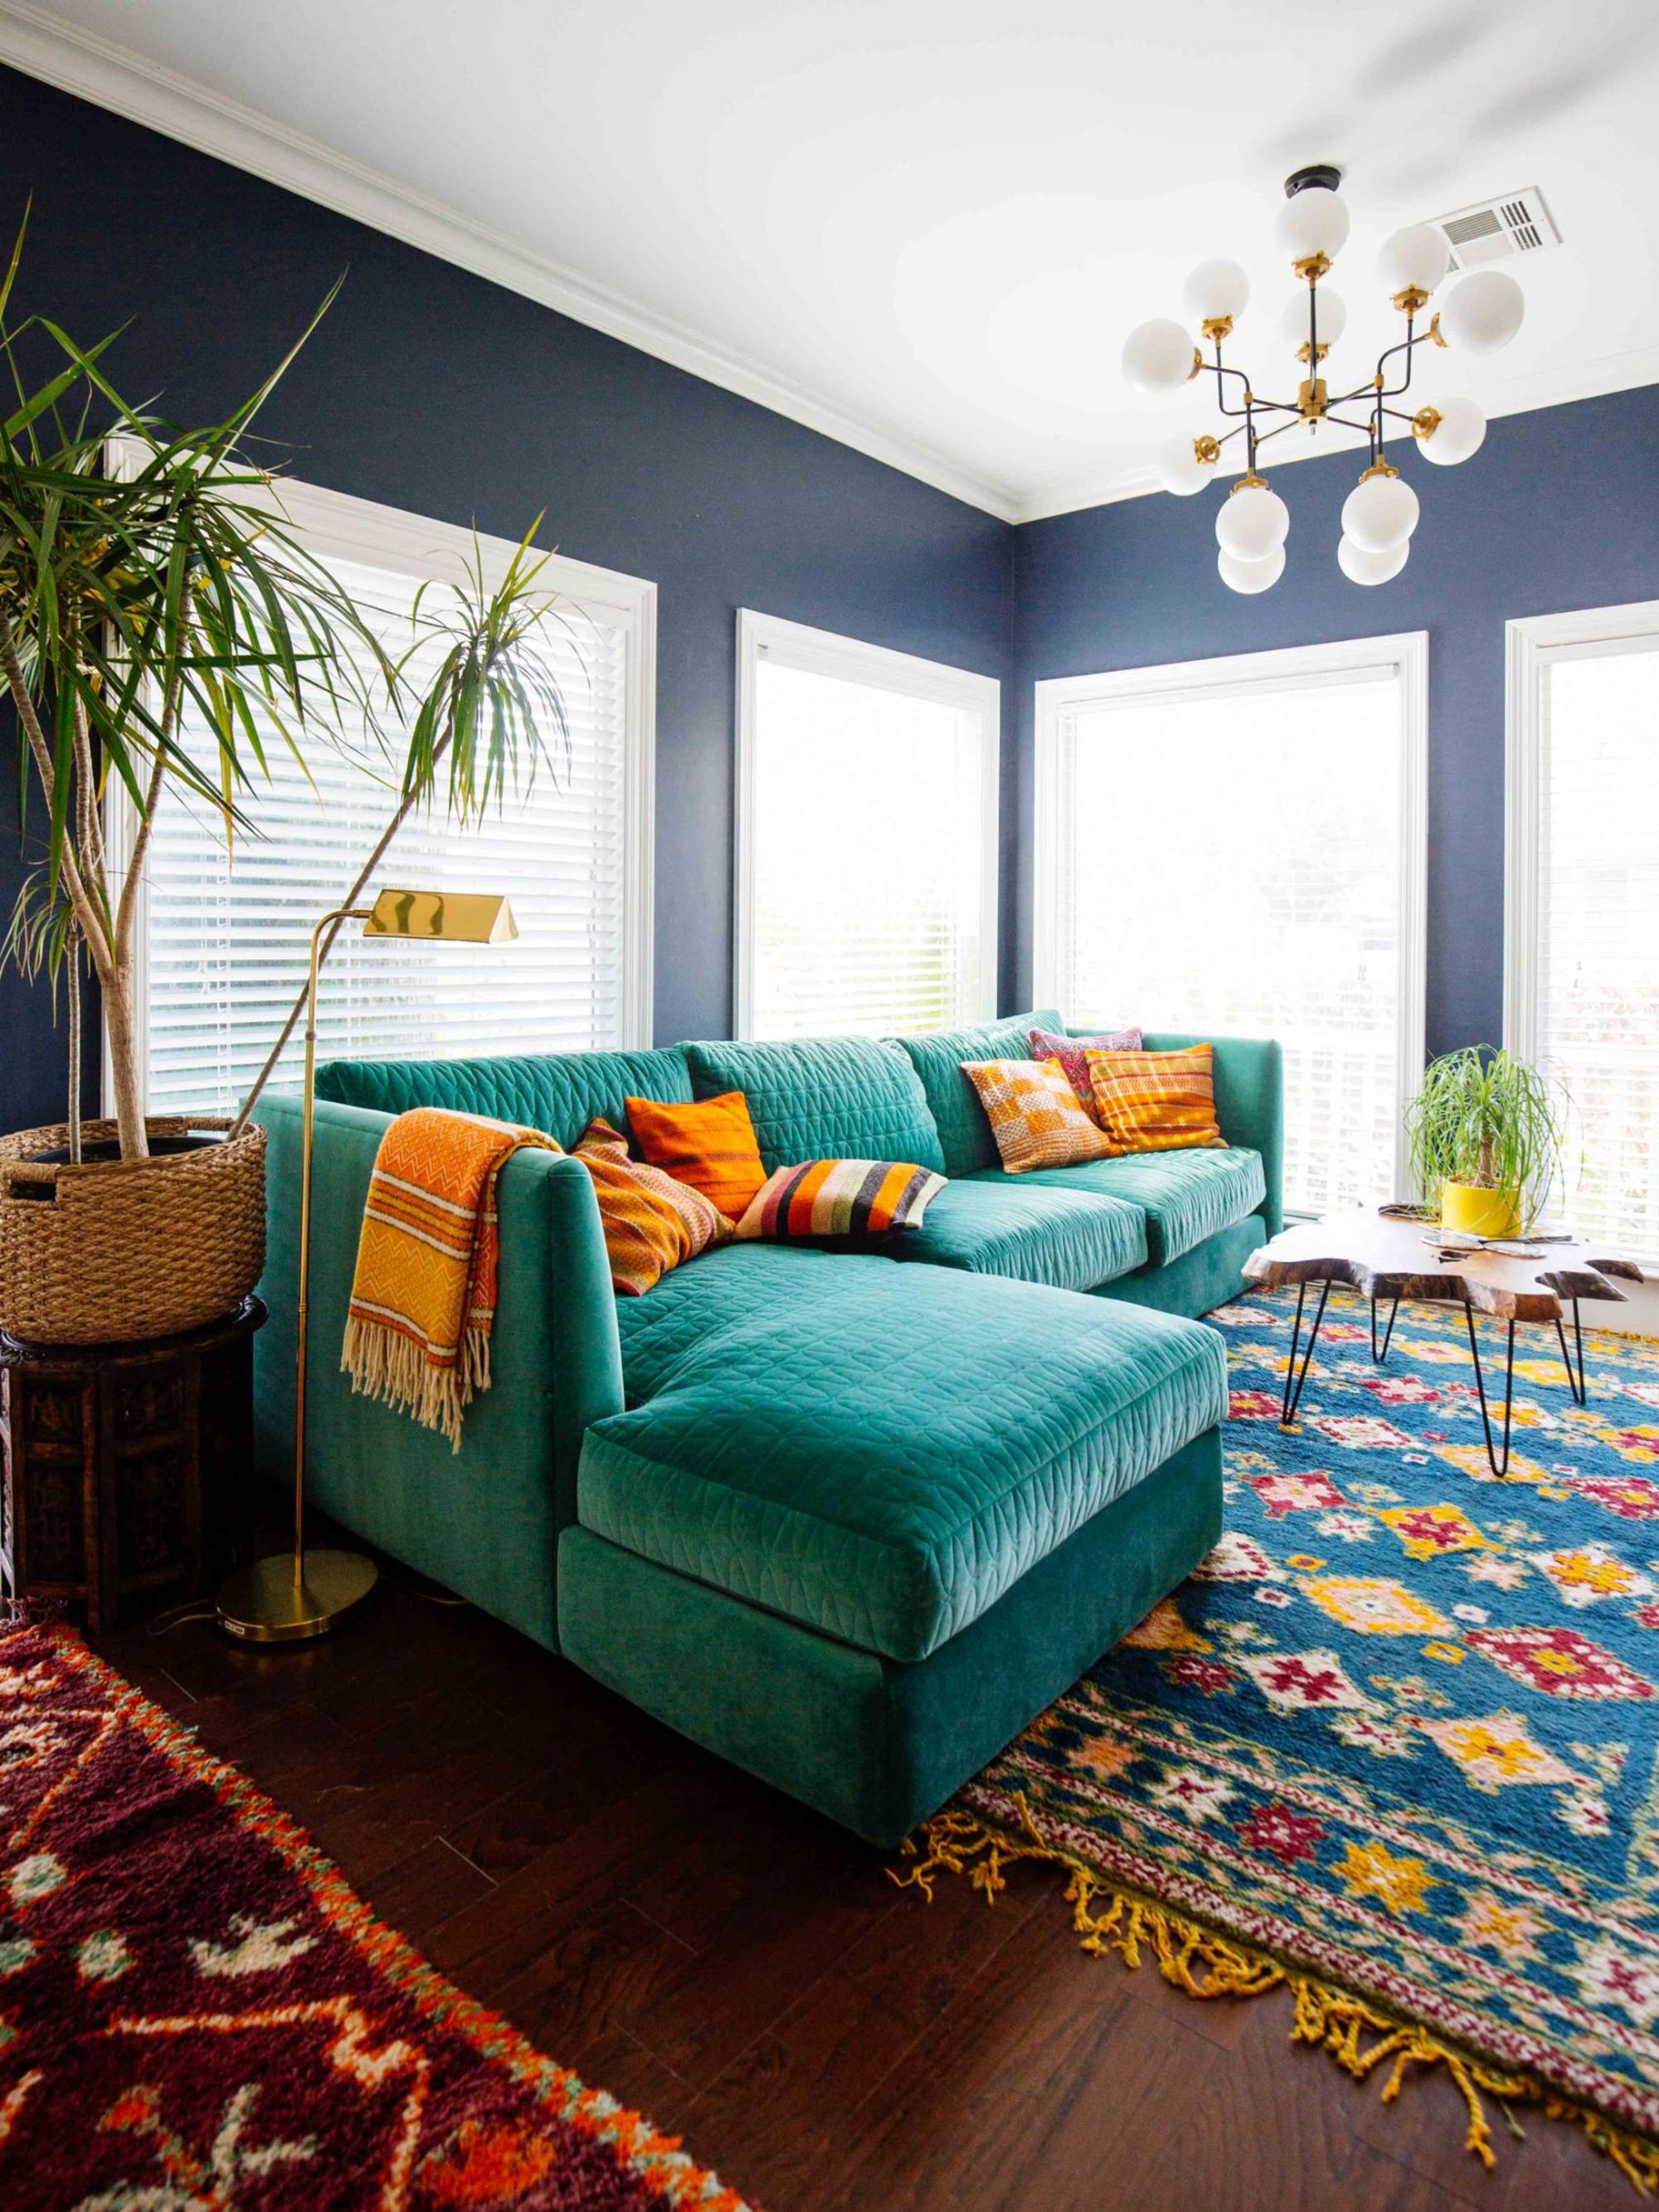 Color boost: How vivid hues in your home can lift your mood | CNN